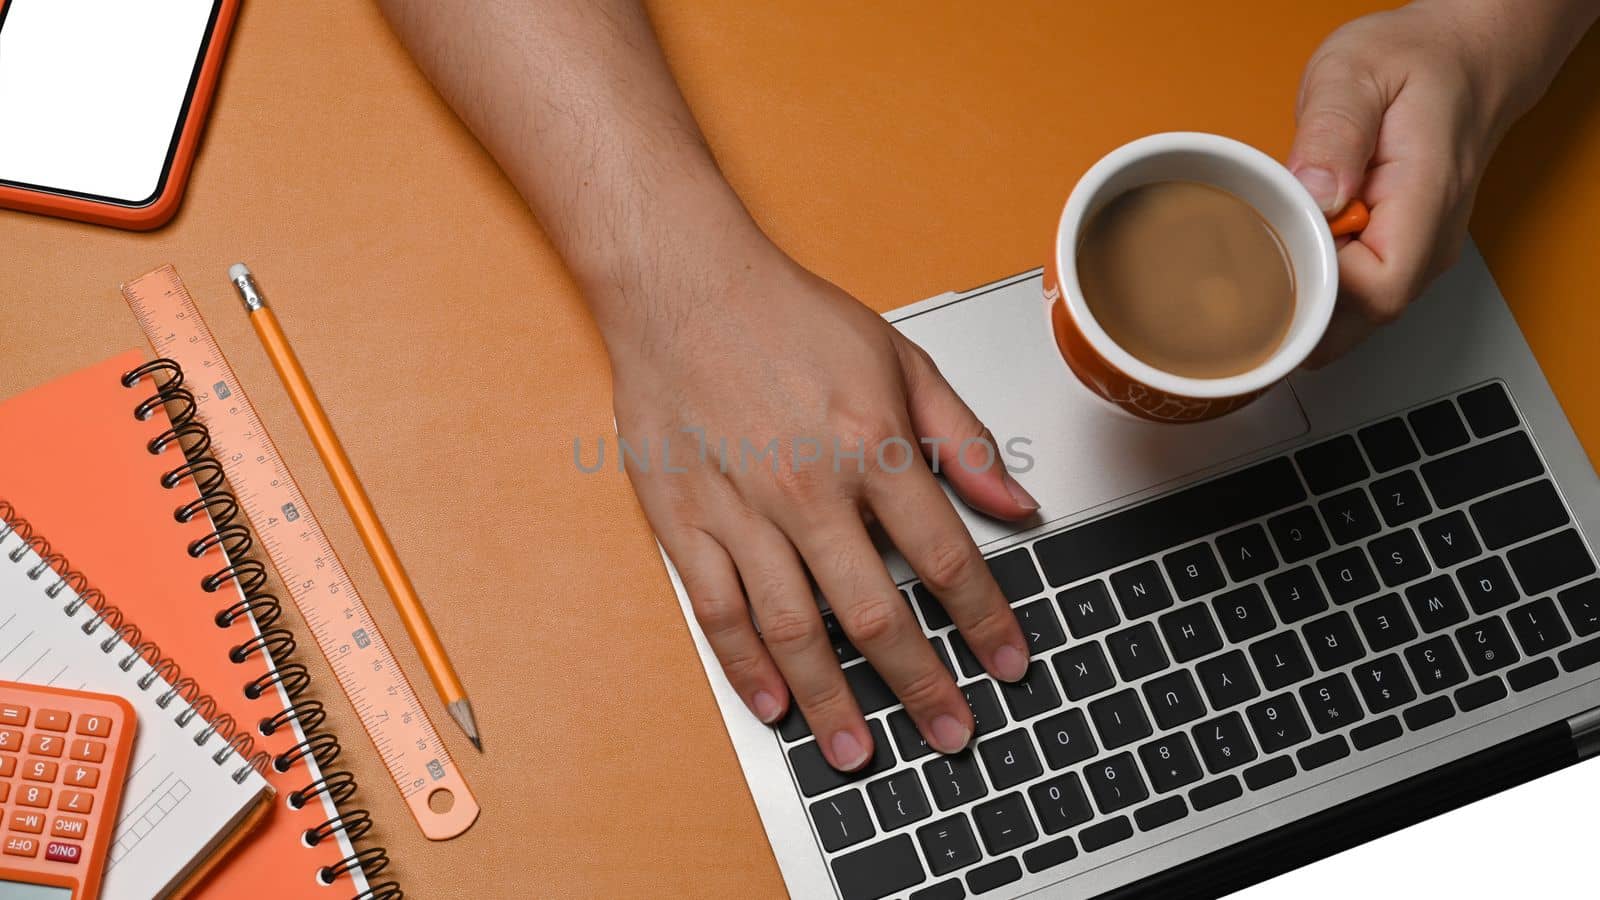 Man holding coffee cup and using laptop computer on brown leather.